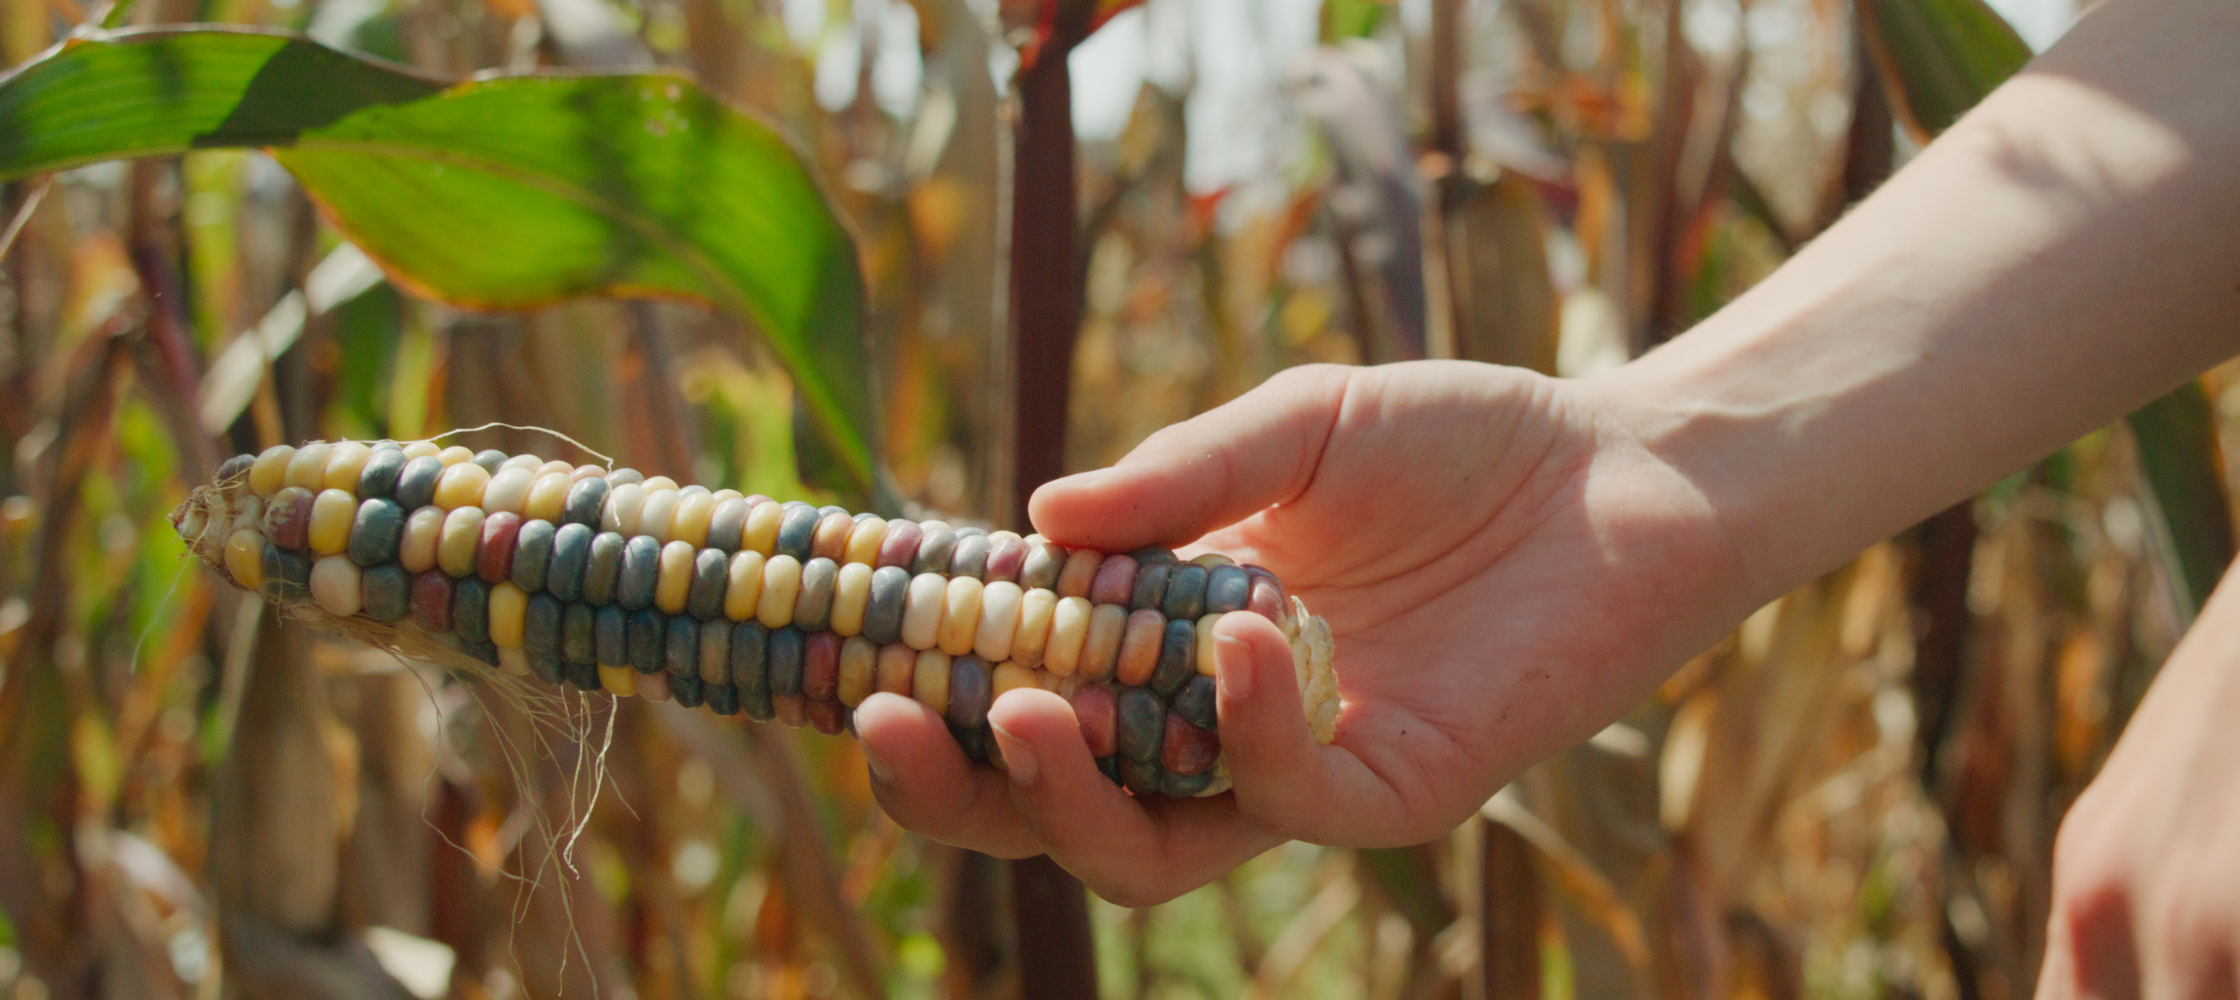 A hand holding an ear of flour corn which has colorful yellow, red, and navy blue kernels